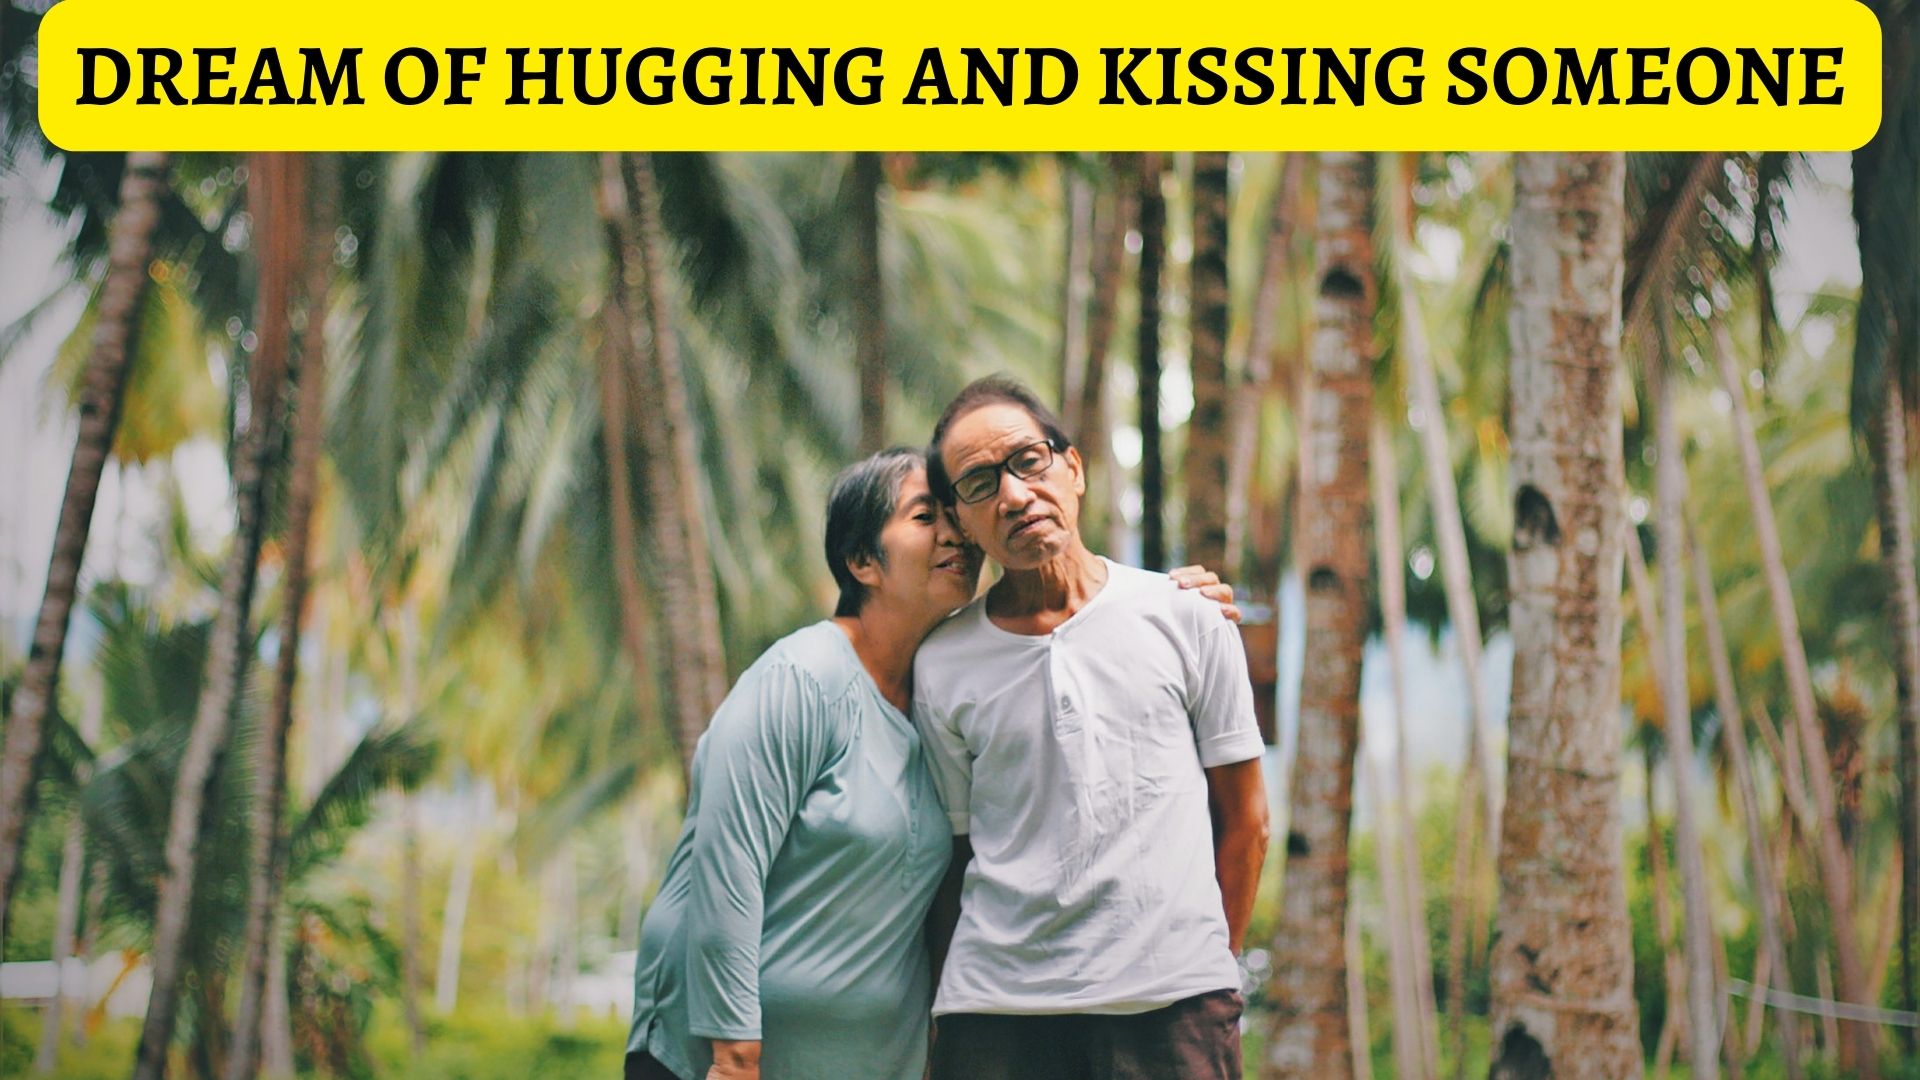 Dream Of Hugging And Kissing Someone - An Omen For Happy Unions